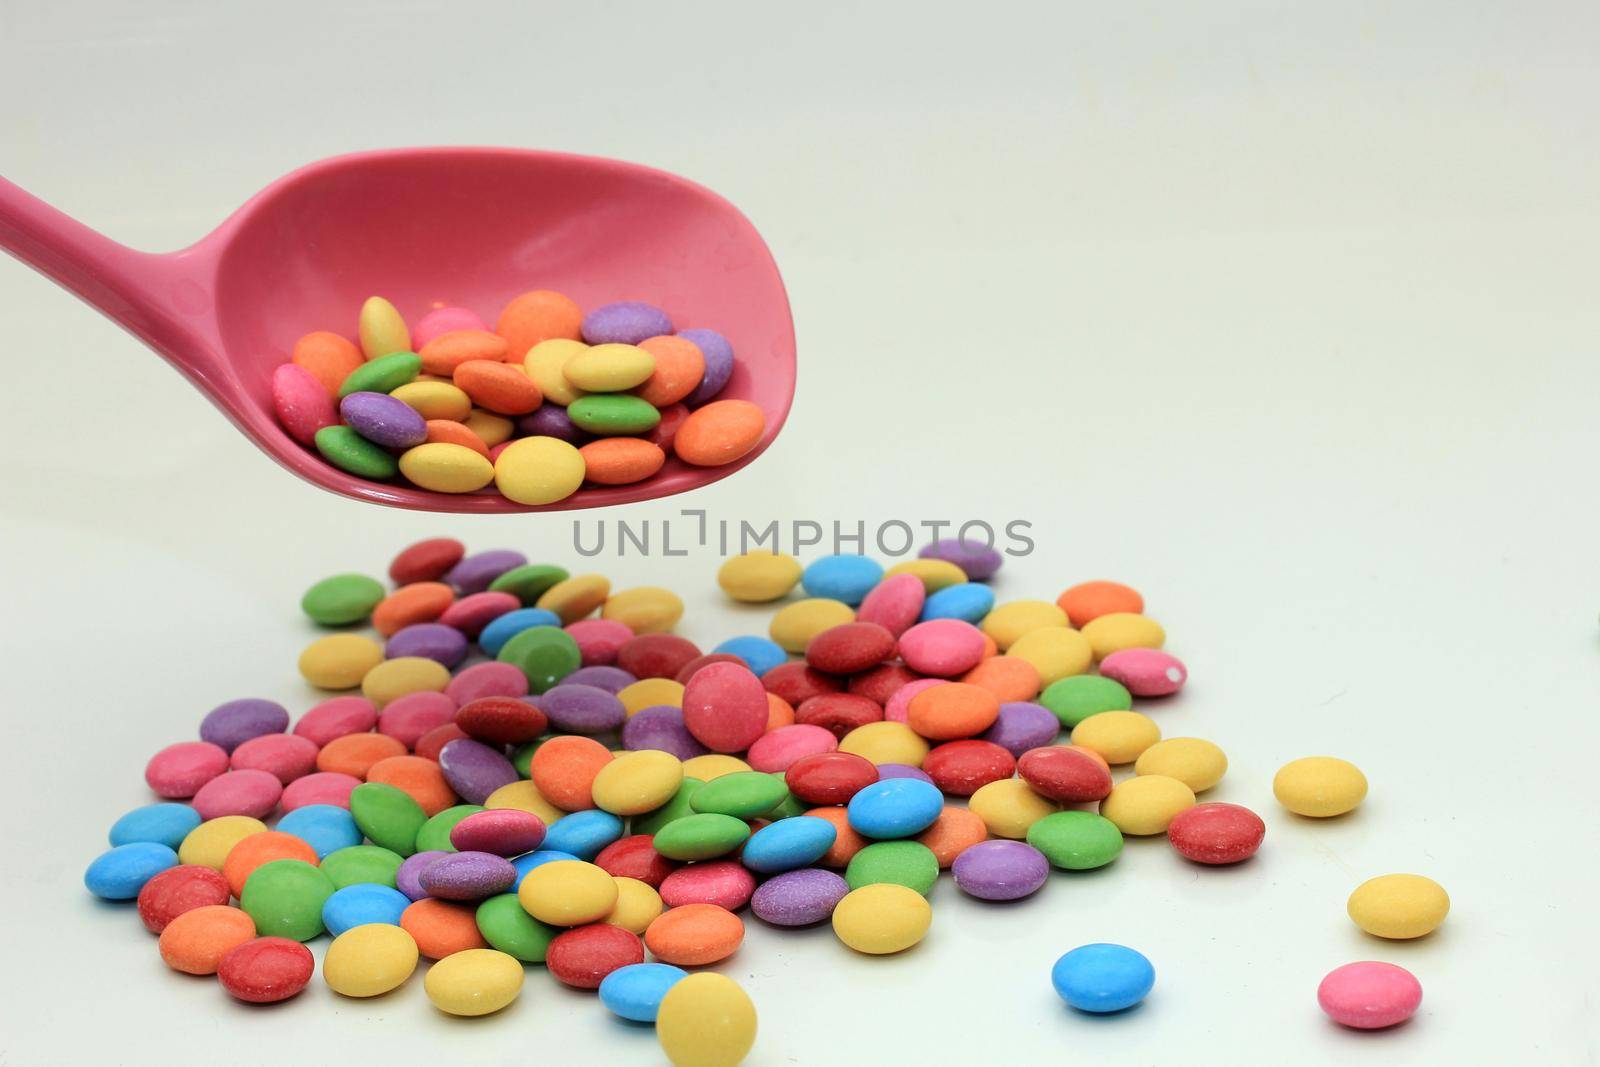 Chocolate filled candies in various bright colors